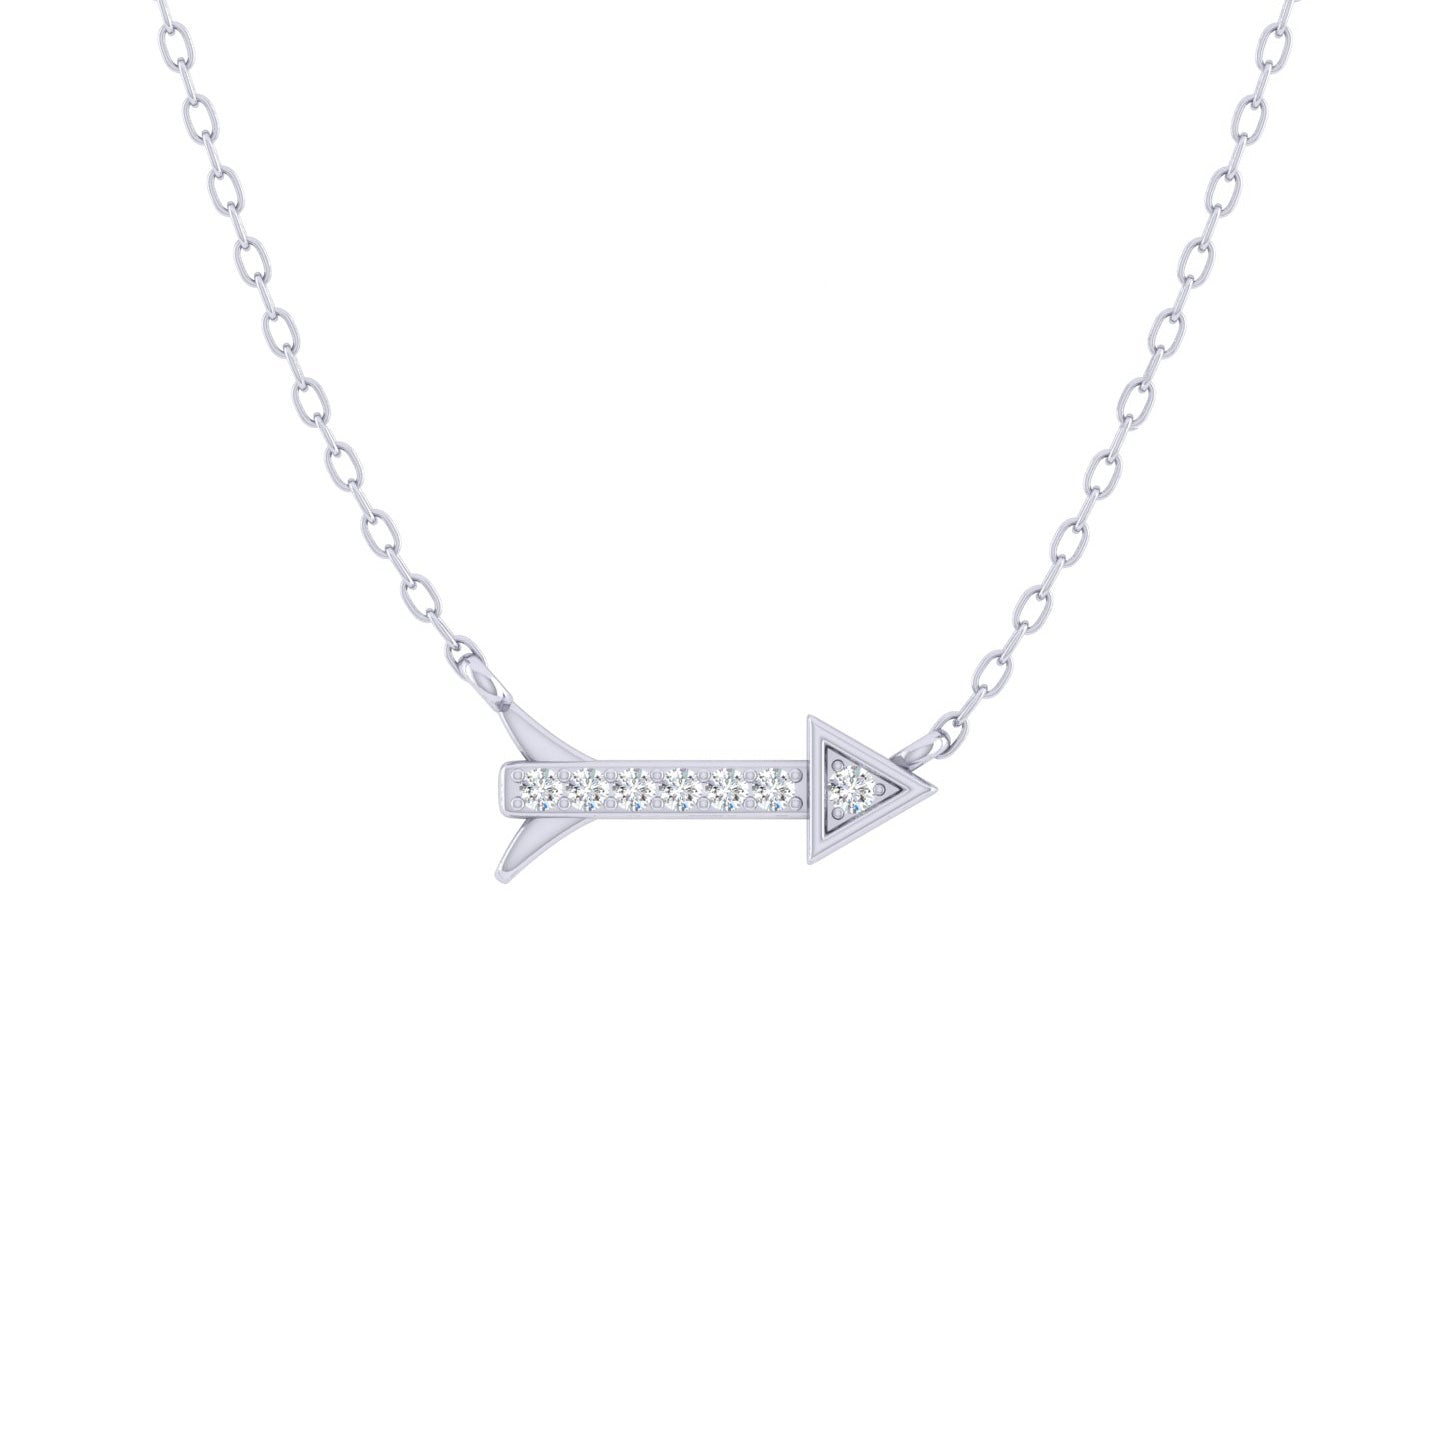 Sideways Arrow 1/20 Cttw Natural Diamond Pendant Necklace set in 925 Sterling Silver